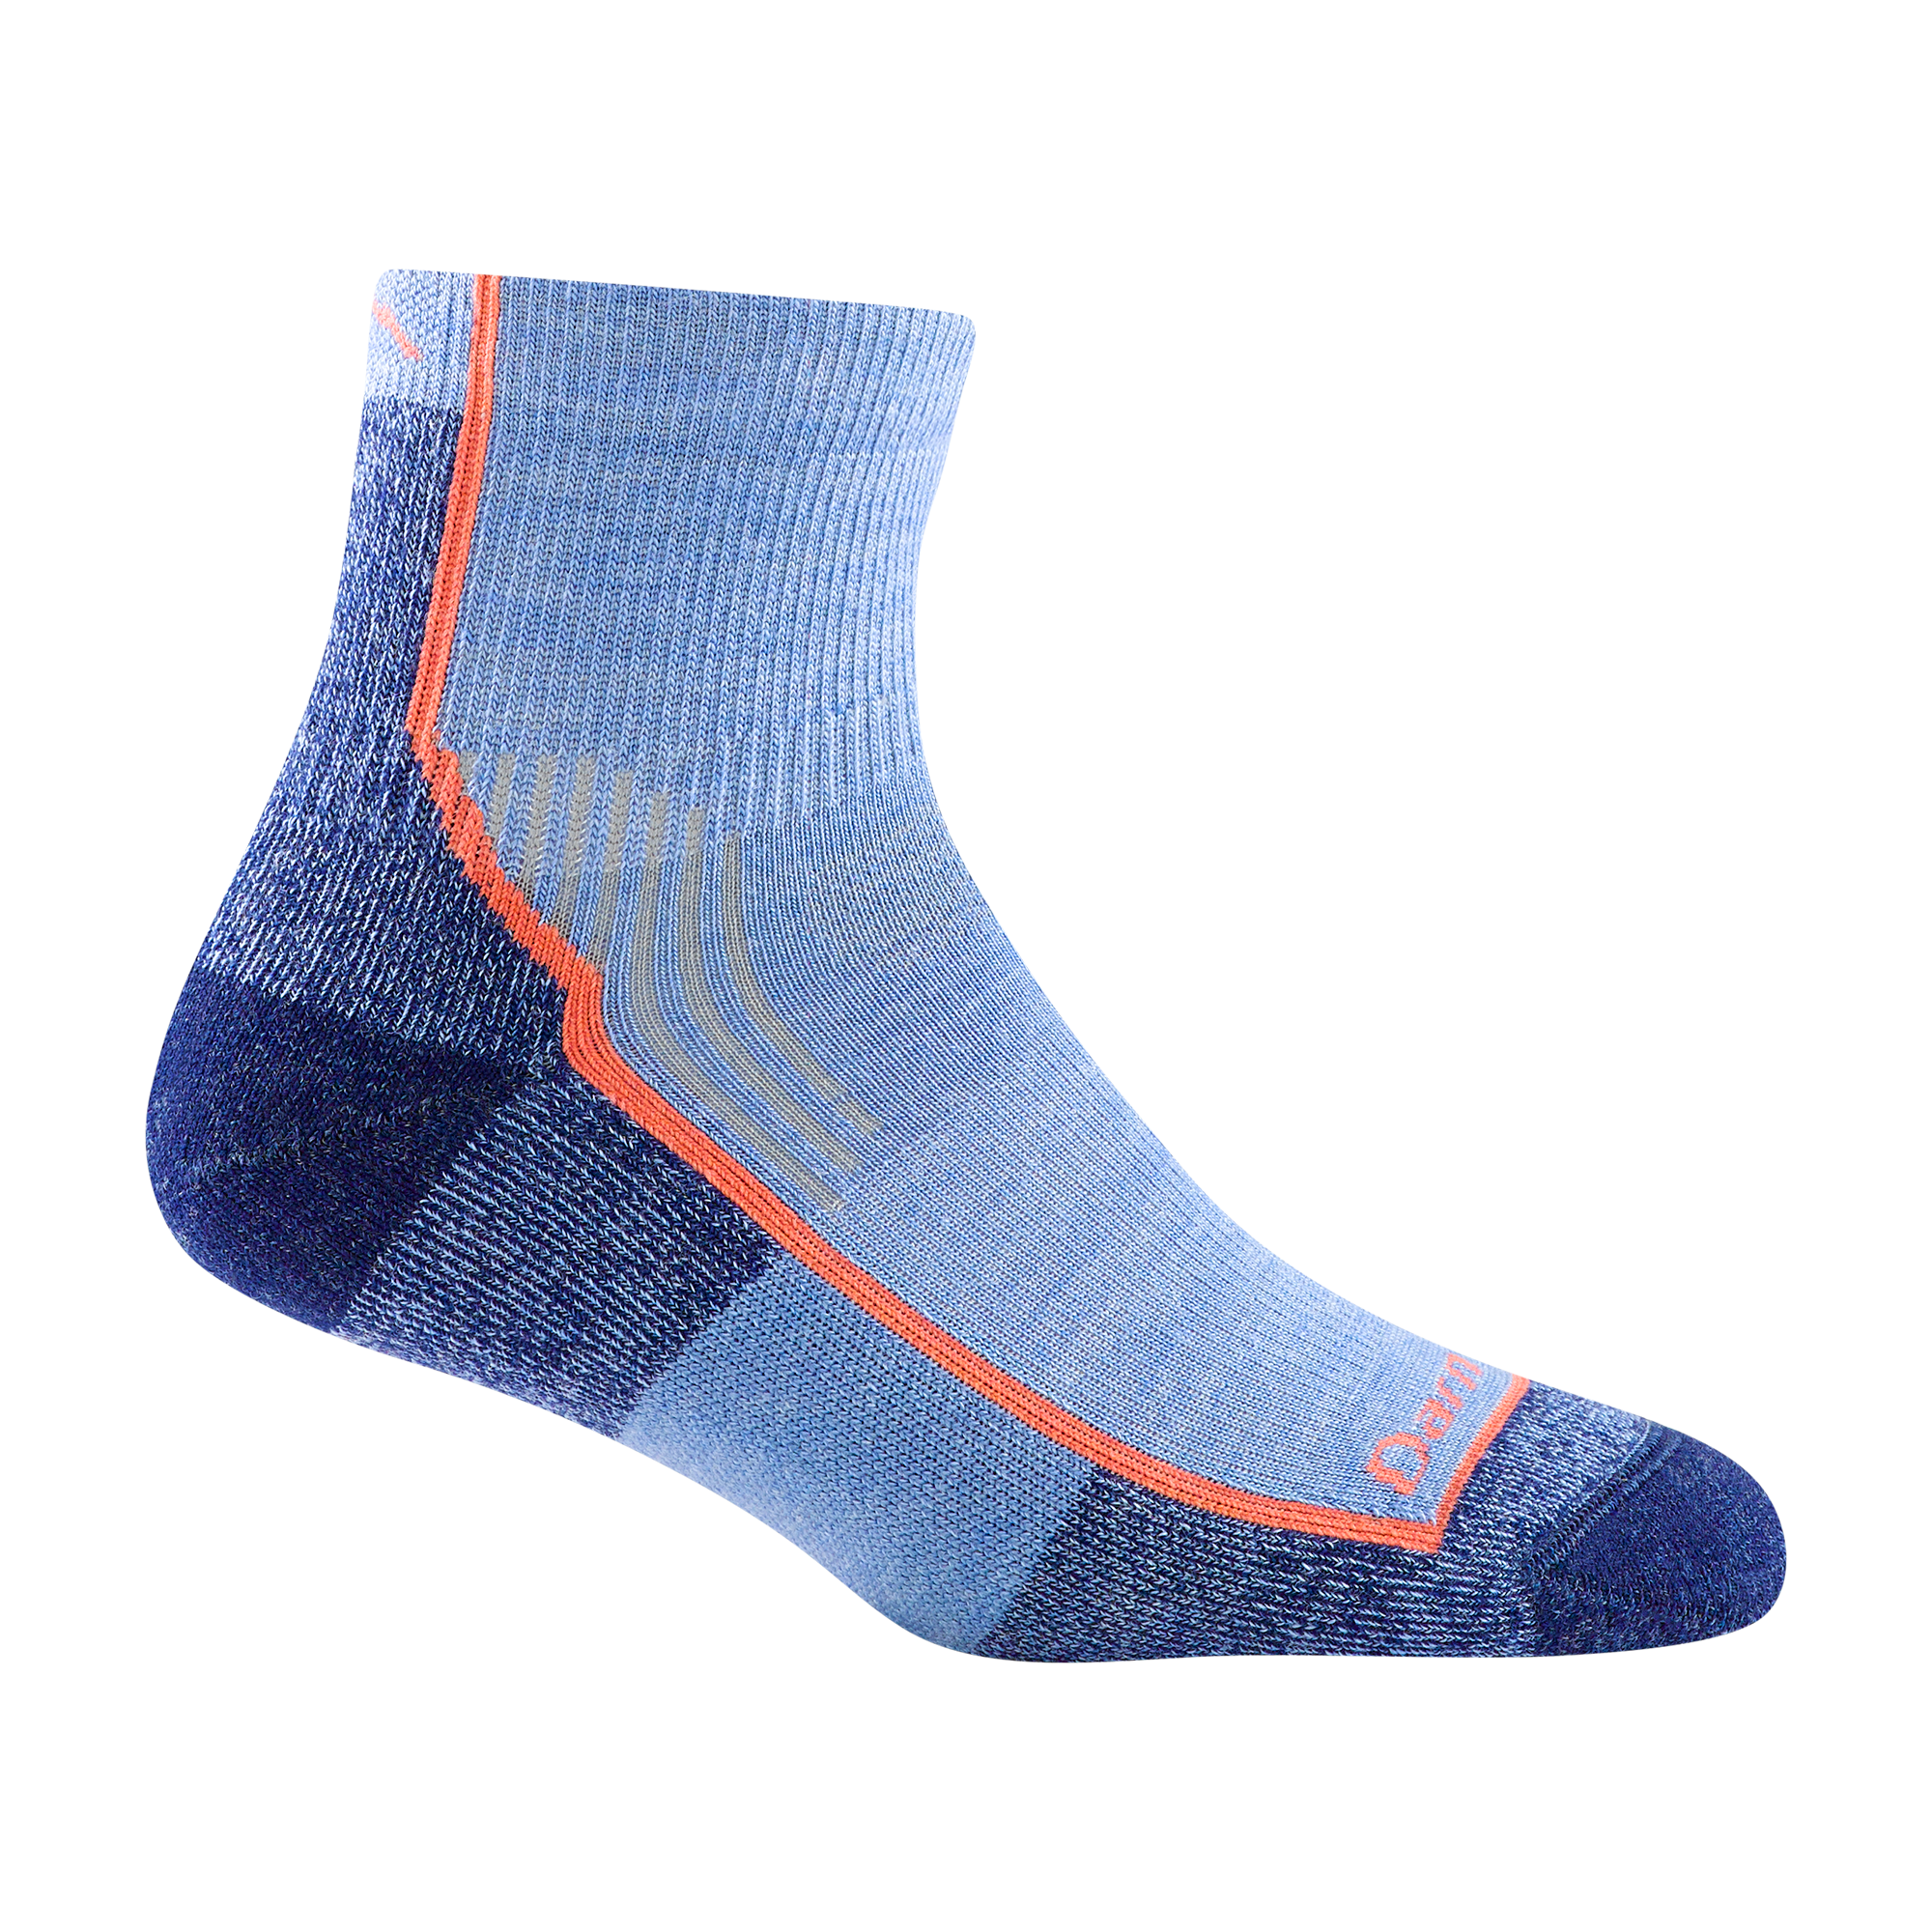 1958 women's quarter hiking sock in color denim blue with navy toe/heel accents and orange forefoot outline